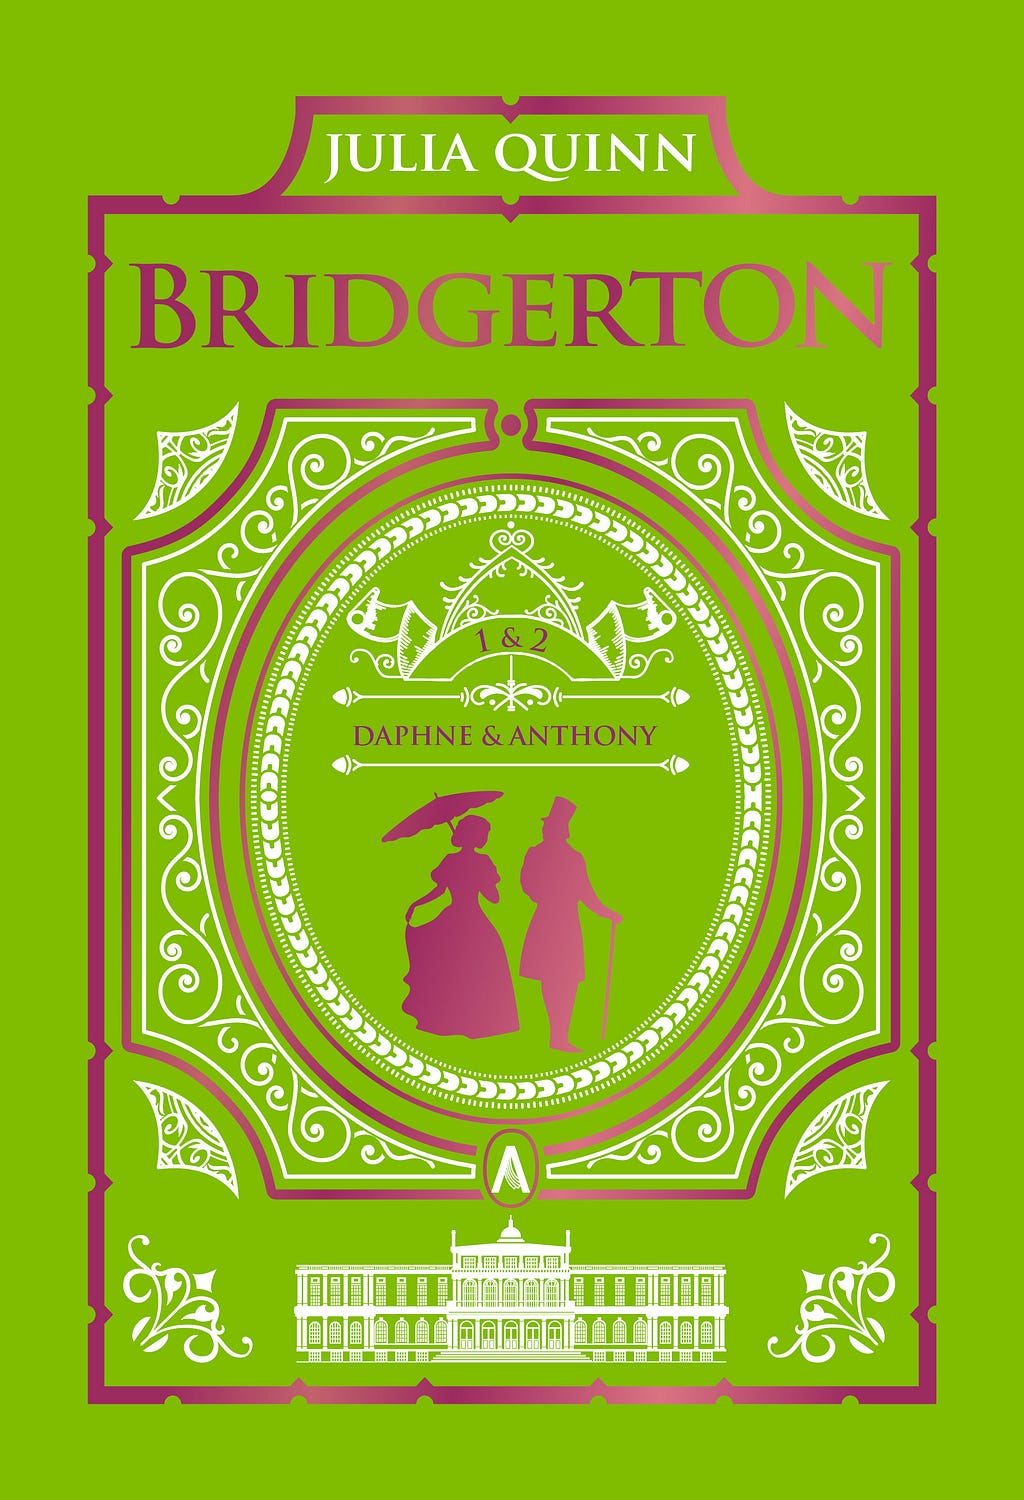 PDF The Duke and I and The Viscount Who Loved Me: Bridgerton Collector's Edition (Bridgerton Collector's Edition, 1) By Julia Quinn